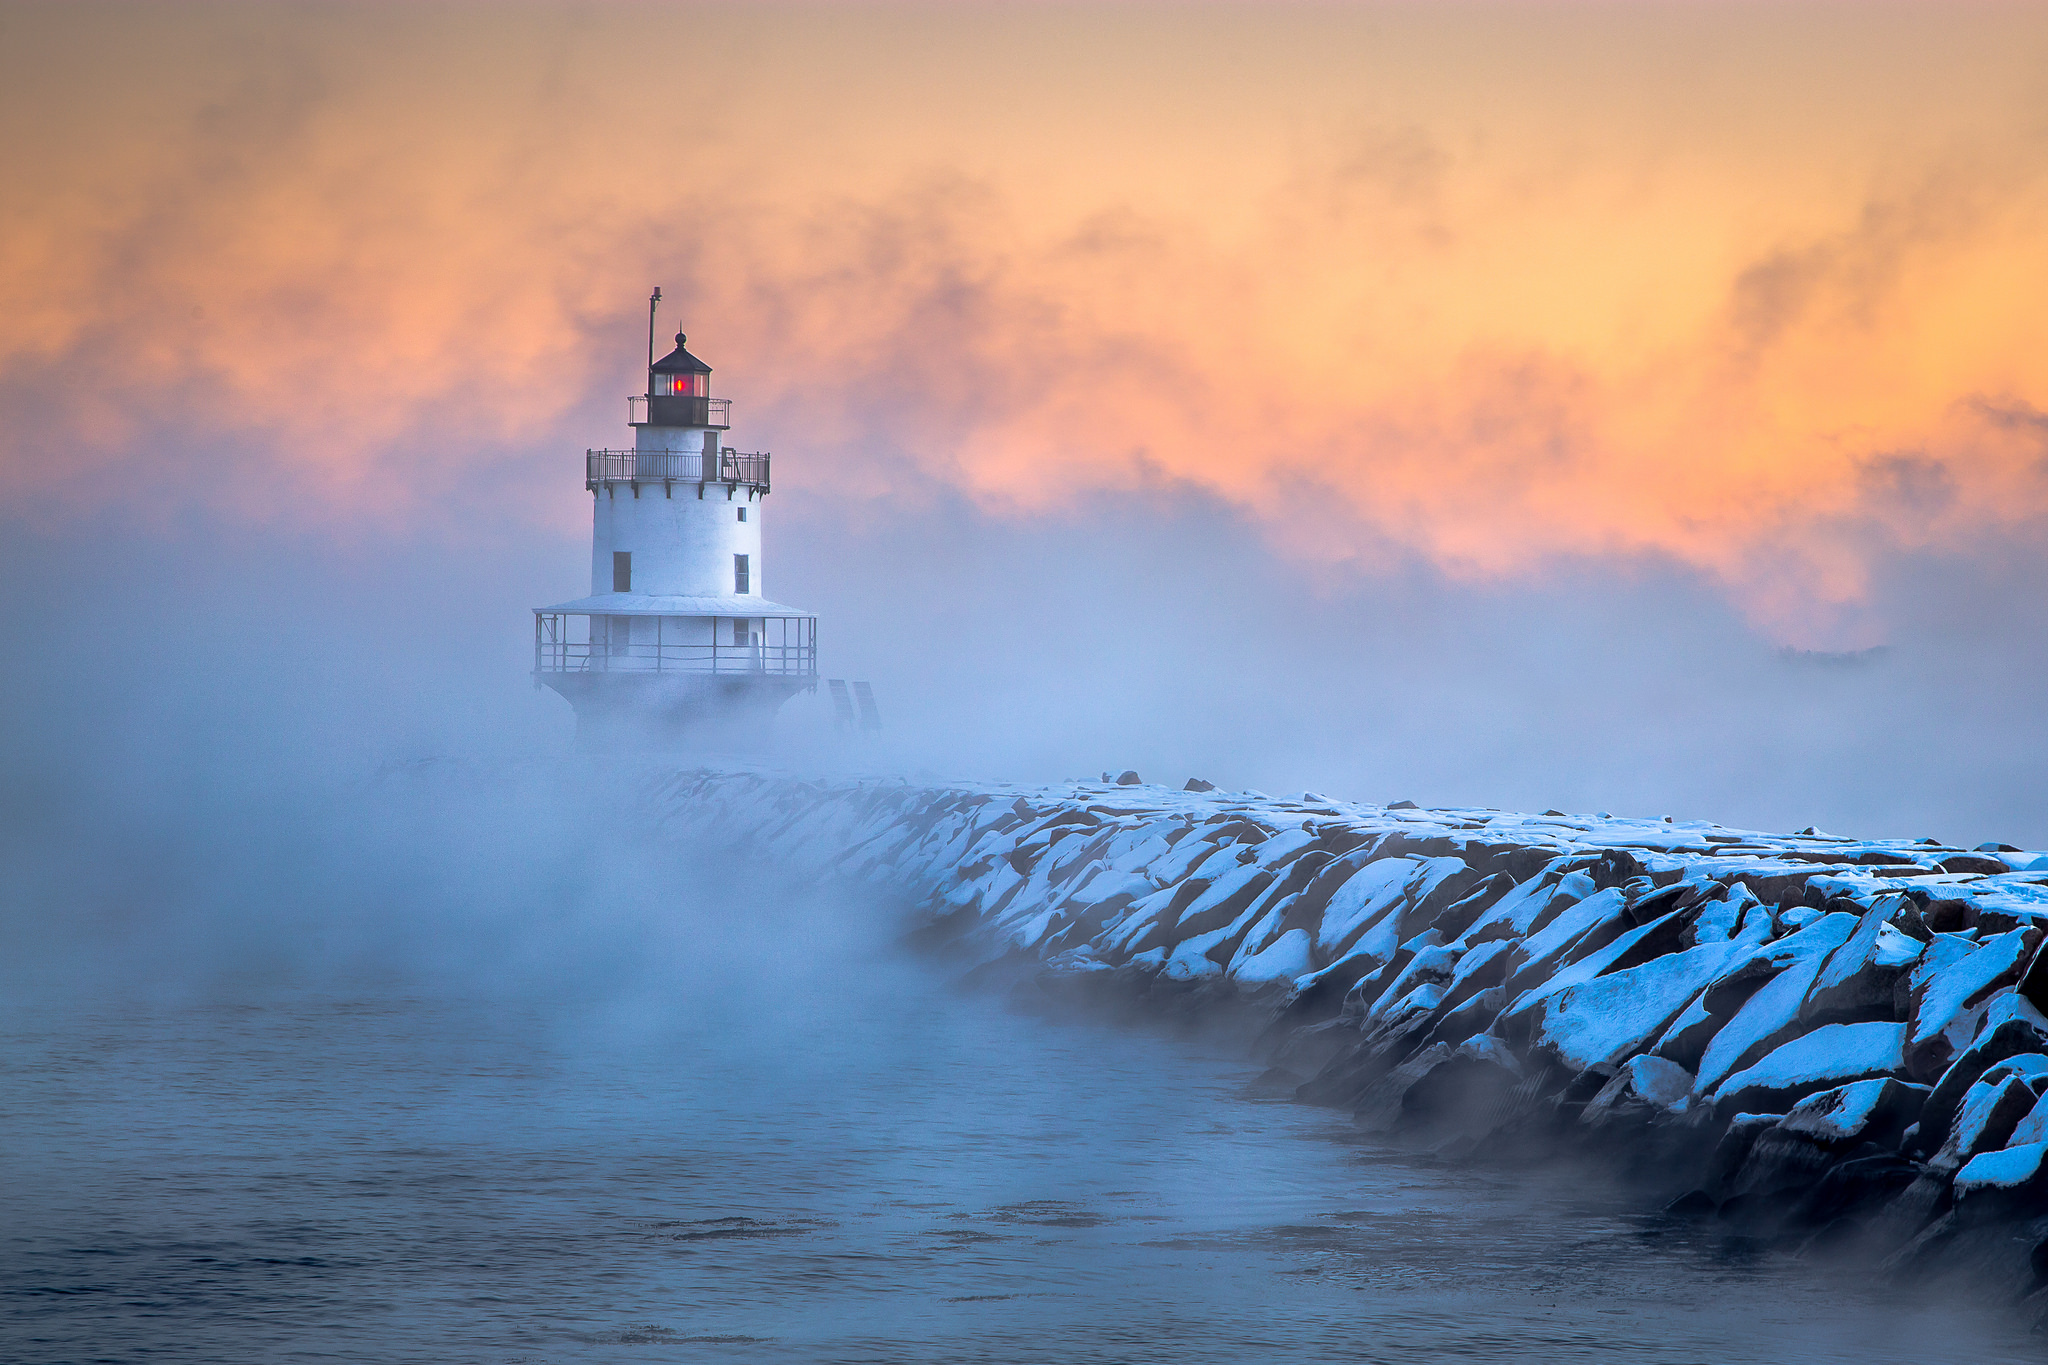 Lighthouse in a Storm by Ben Williamson